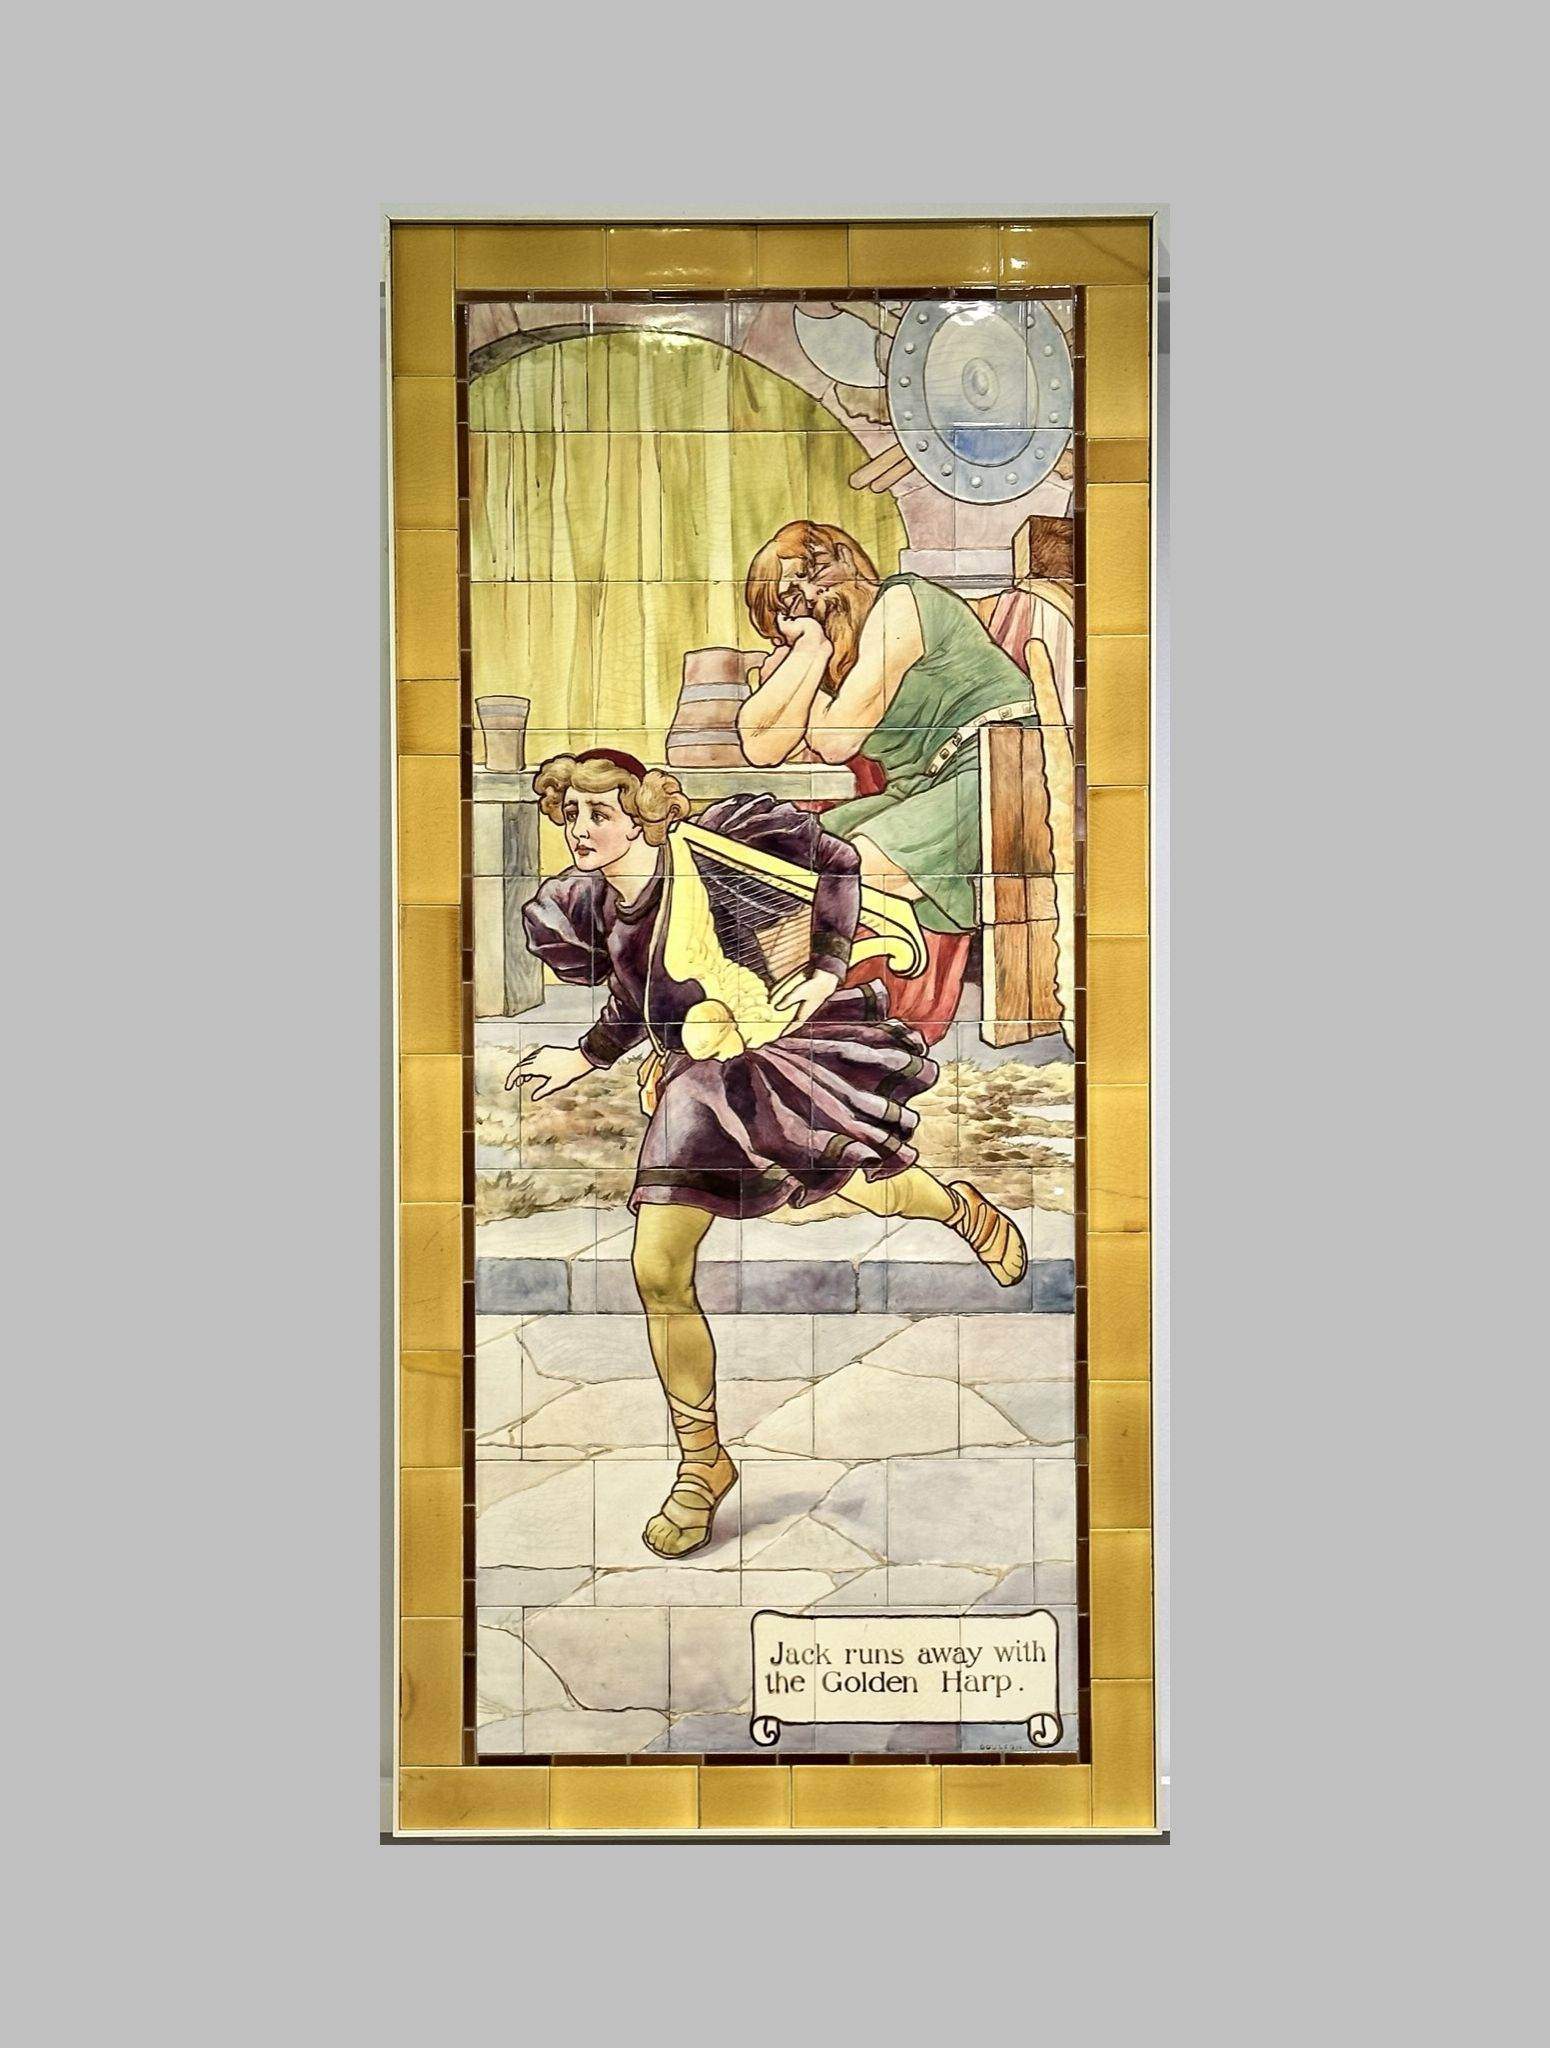 Jack and The Beanstalk scene painted on Doulton tiles (commissioned around 1900) from the Evelina Children's Hospital displayed in the long corridor of at St Thomas' hospital.